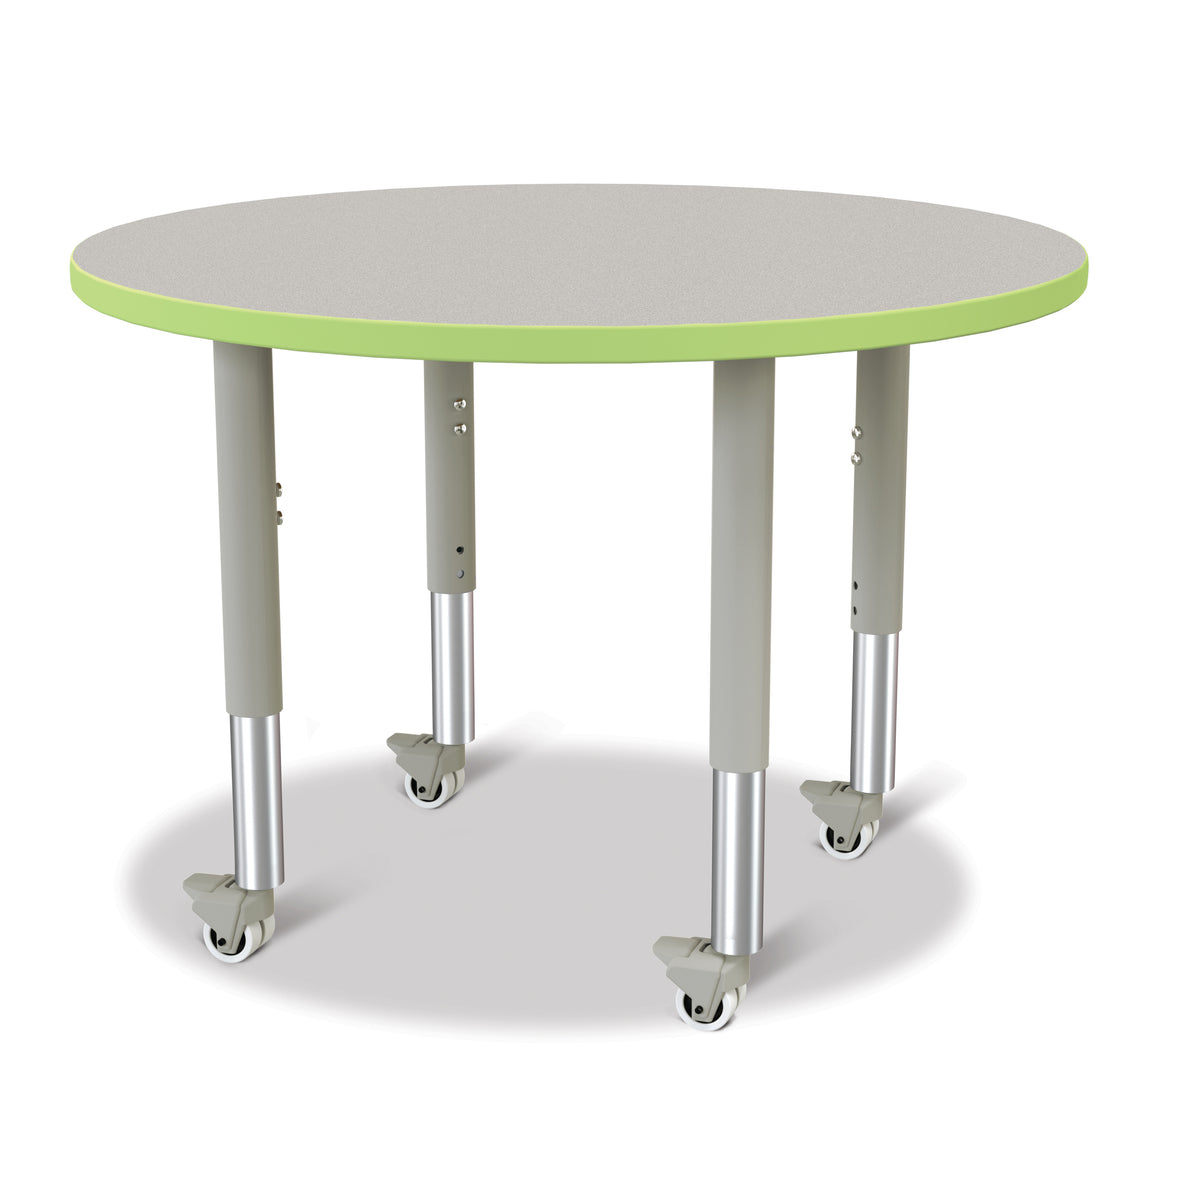 6488JCM130, Berries Round Activity Table - 36" Diameter, Mobile - Freckled Gray/Key Lime/Gray